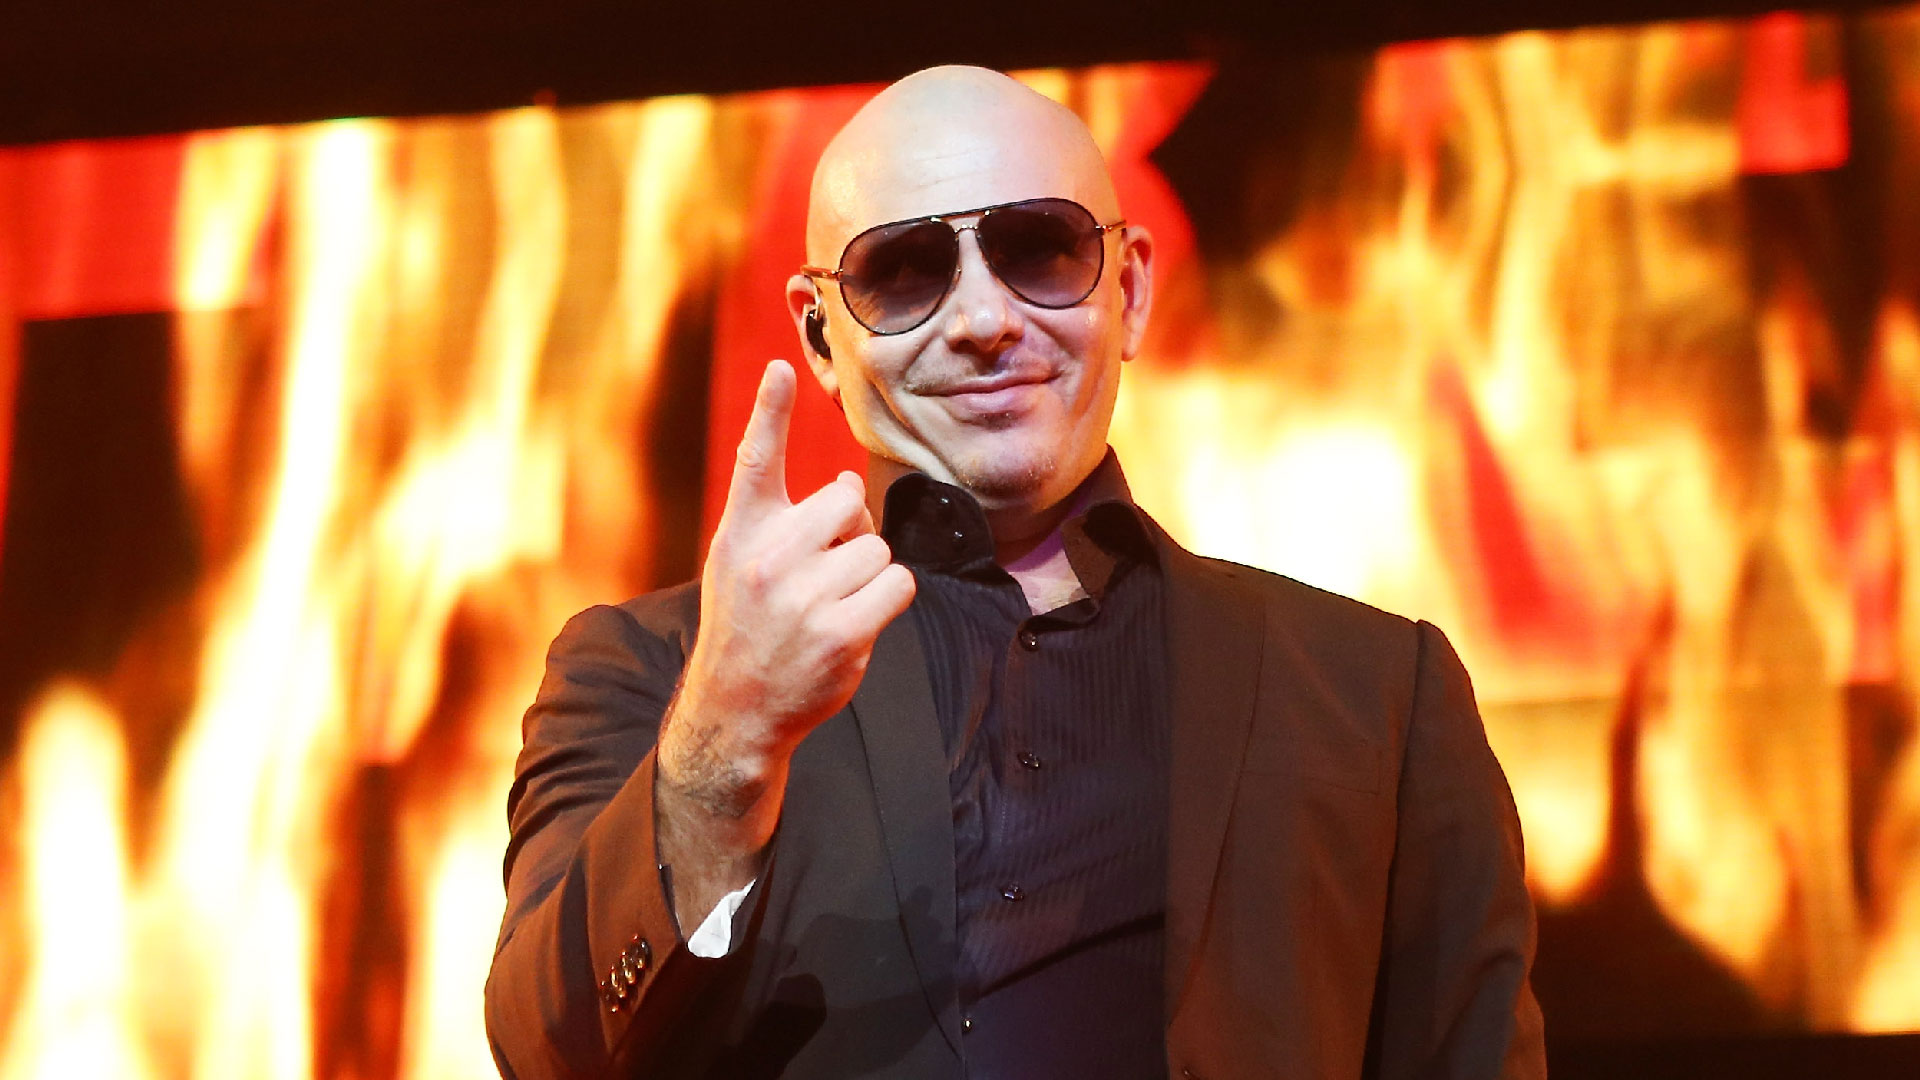 Armando Christian Perez aka Pitbull performs onstage during the Mega 96.3 Calibash held at Staples Center on January 24, 2015 in Los Angeles, California